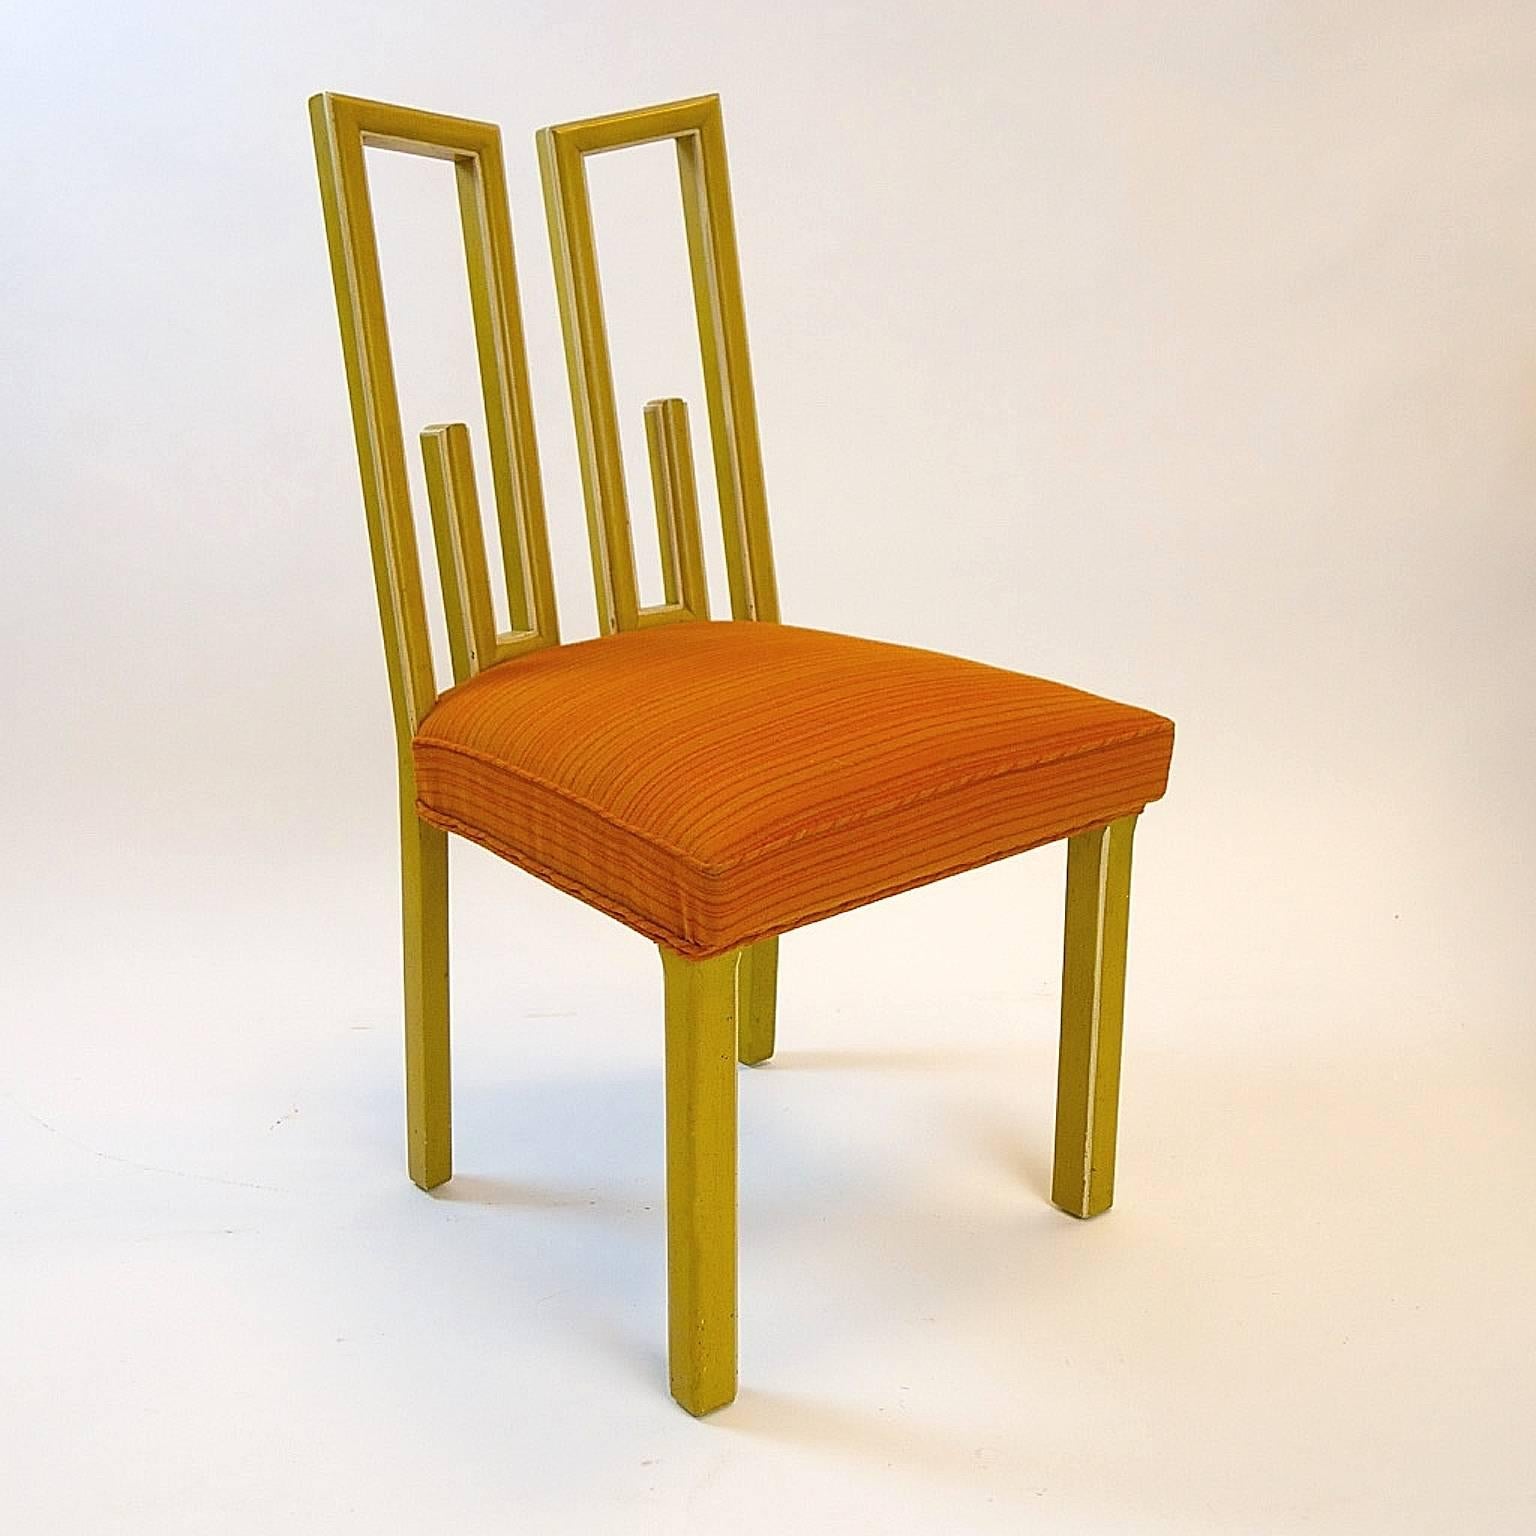 Stunning James Mont dining chairs in a vibrant and exciting color combination. Frames are finished in a gold colored speckled finish with cream colored detailing. Seat upholstery is done in a vibrant orange and in very good condition.